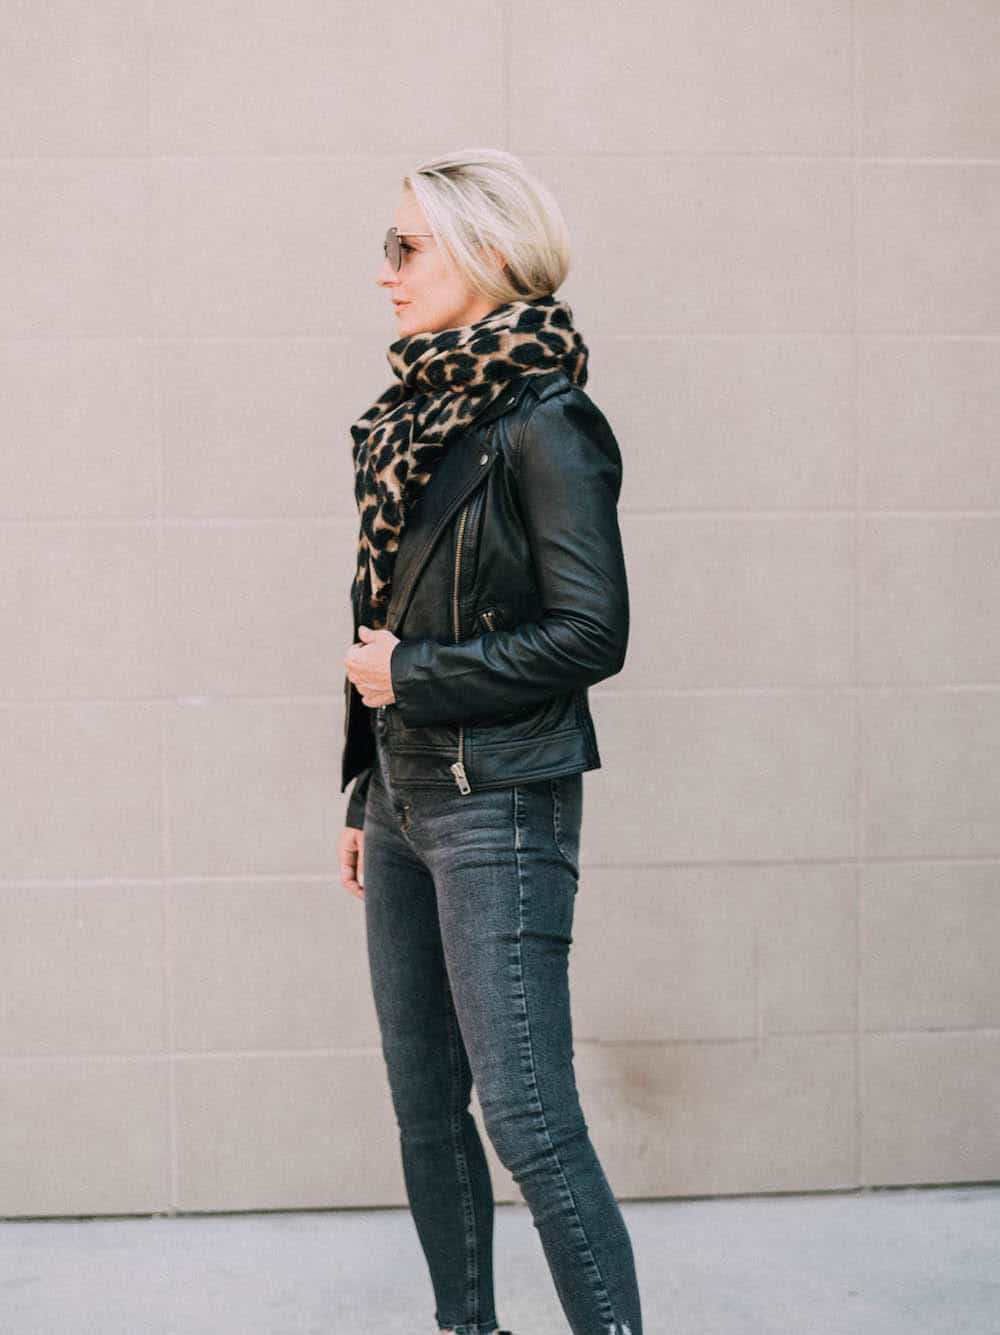 image of a woman in a black leather jacket and black jeans with a leopard scarf